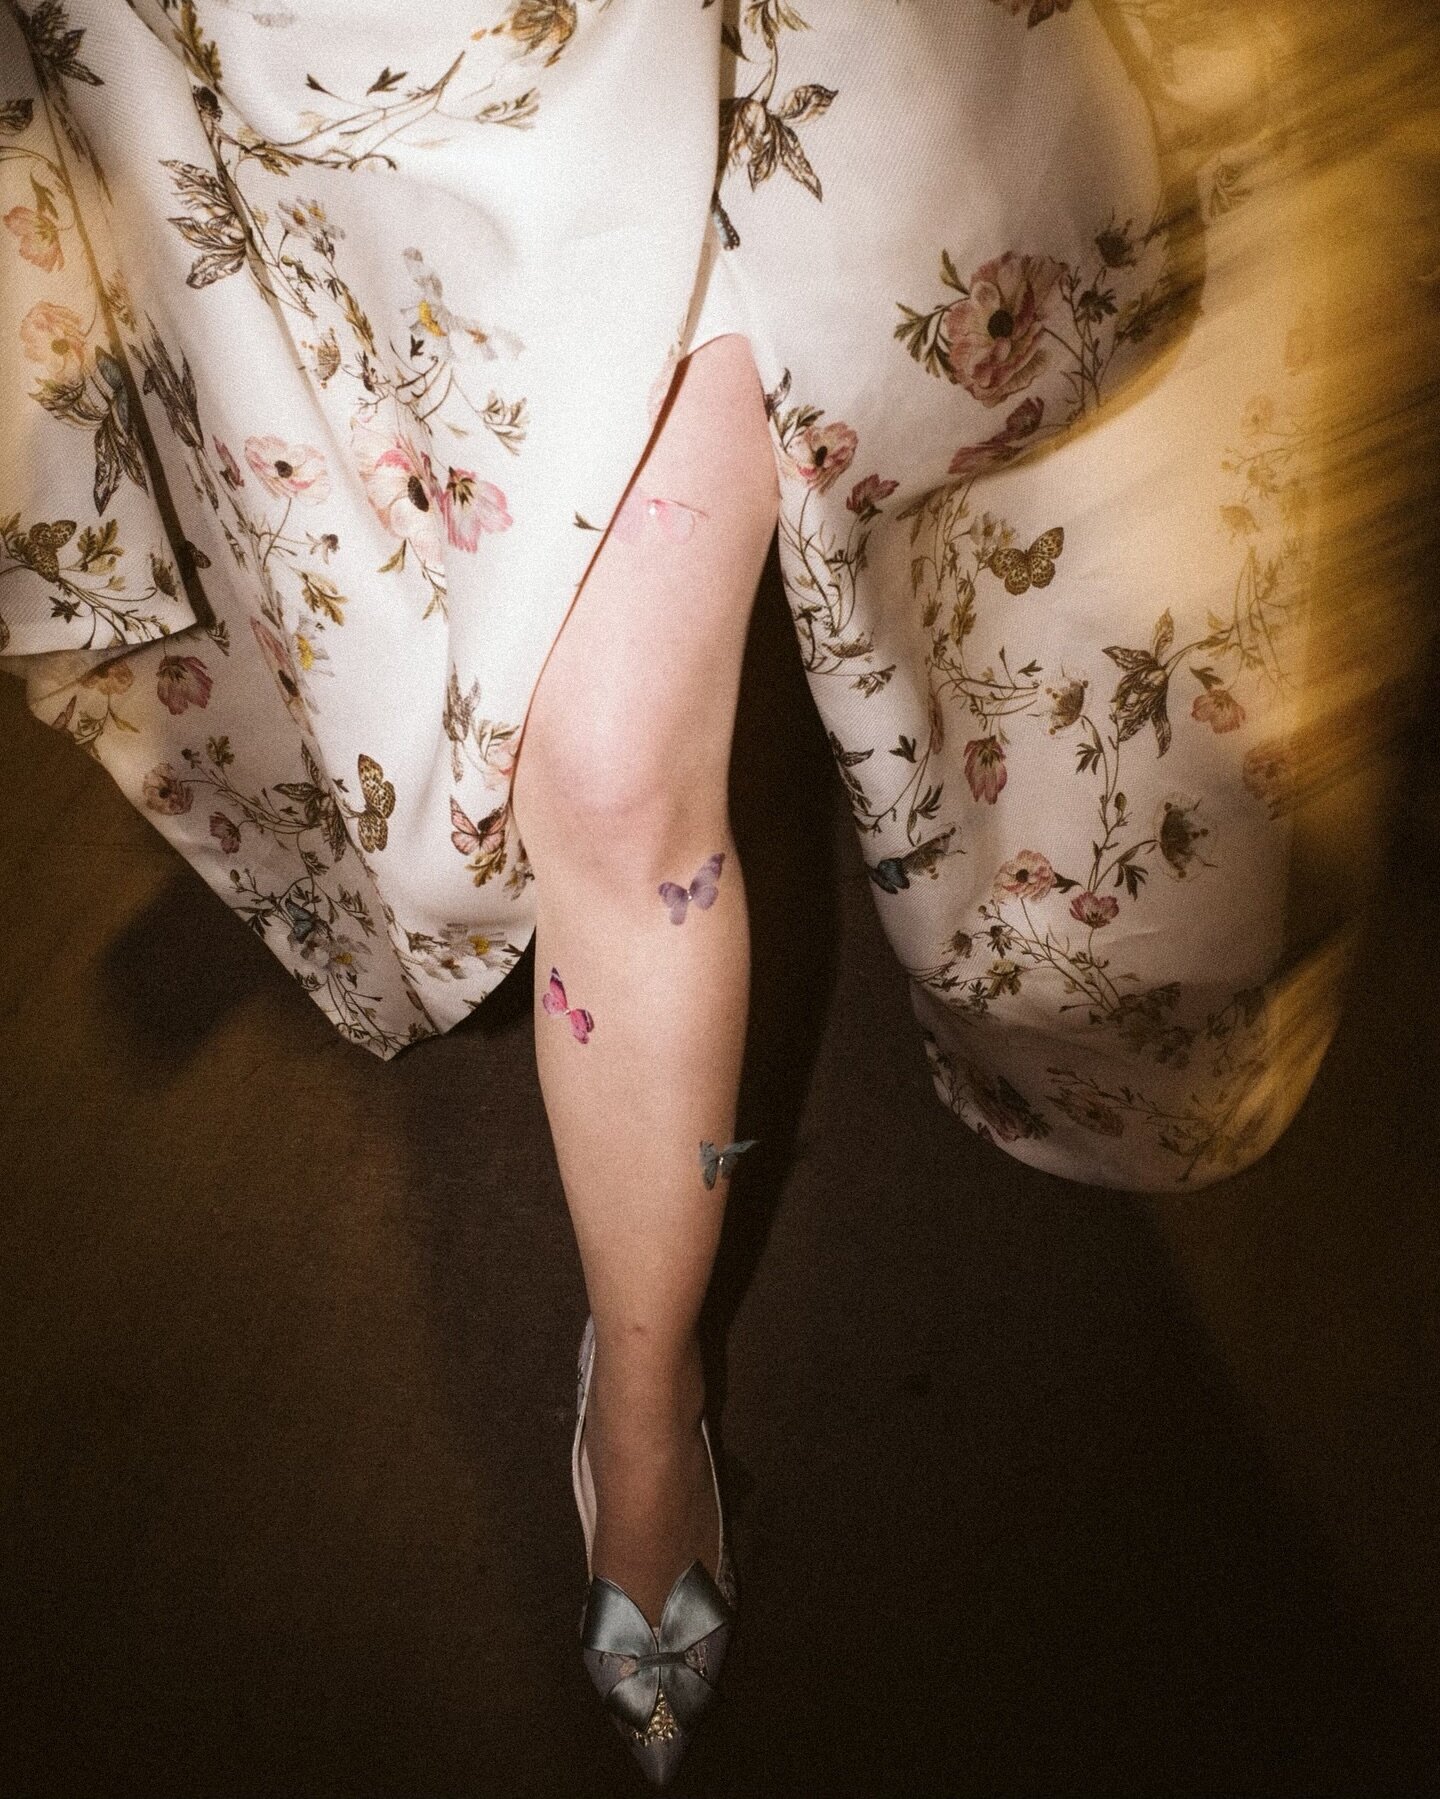 McCall is a literal fashion queen and professional stylist so when she told me she had a pair of butterfly tights to wear under her wedding dress I said &ldquo;go offff&rdquo;